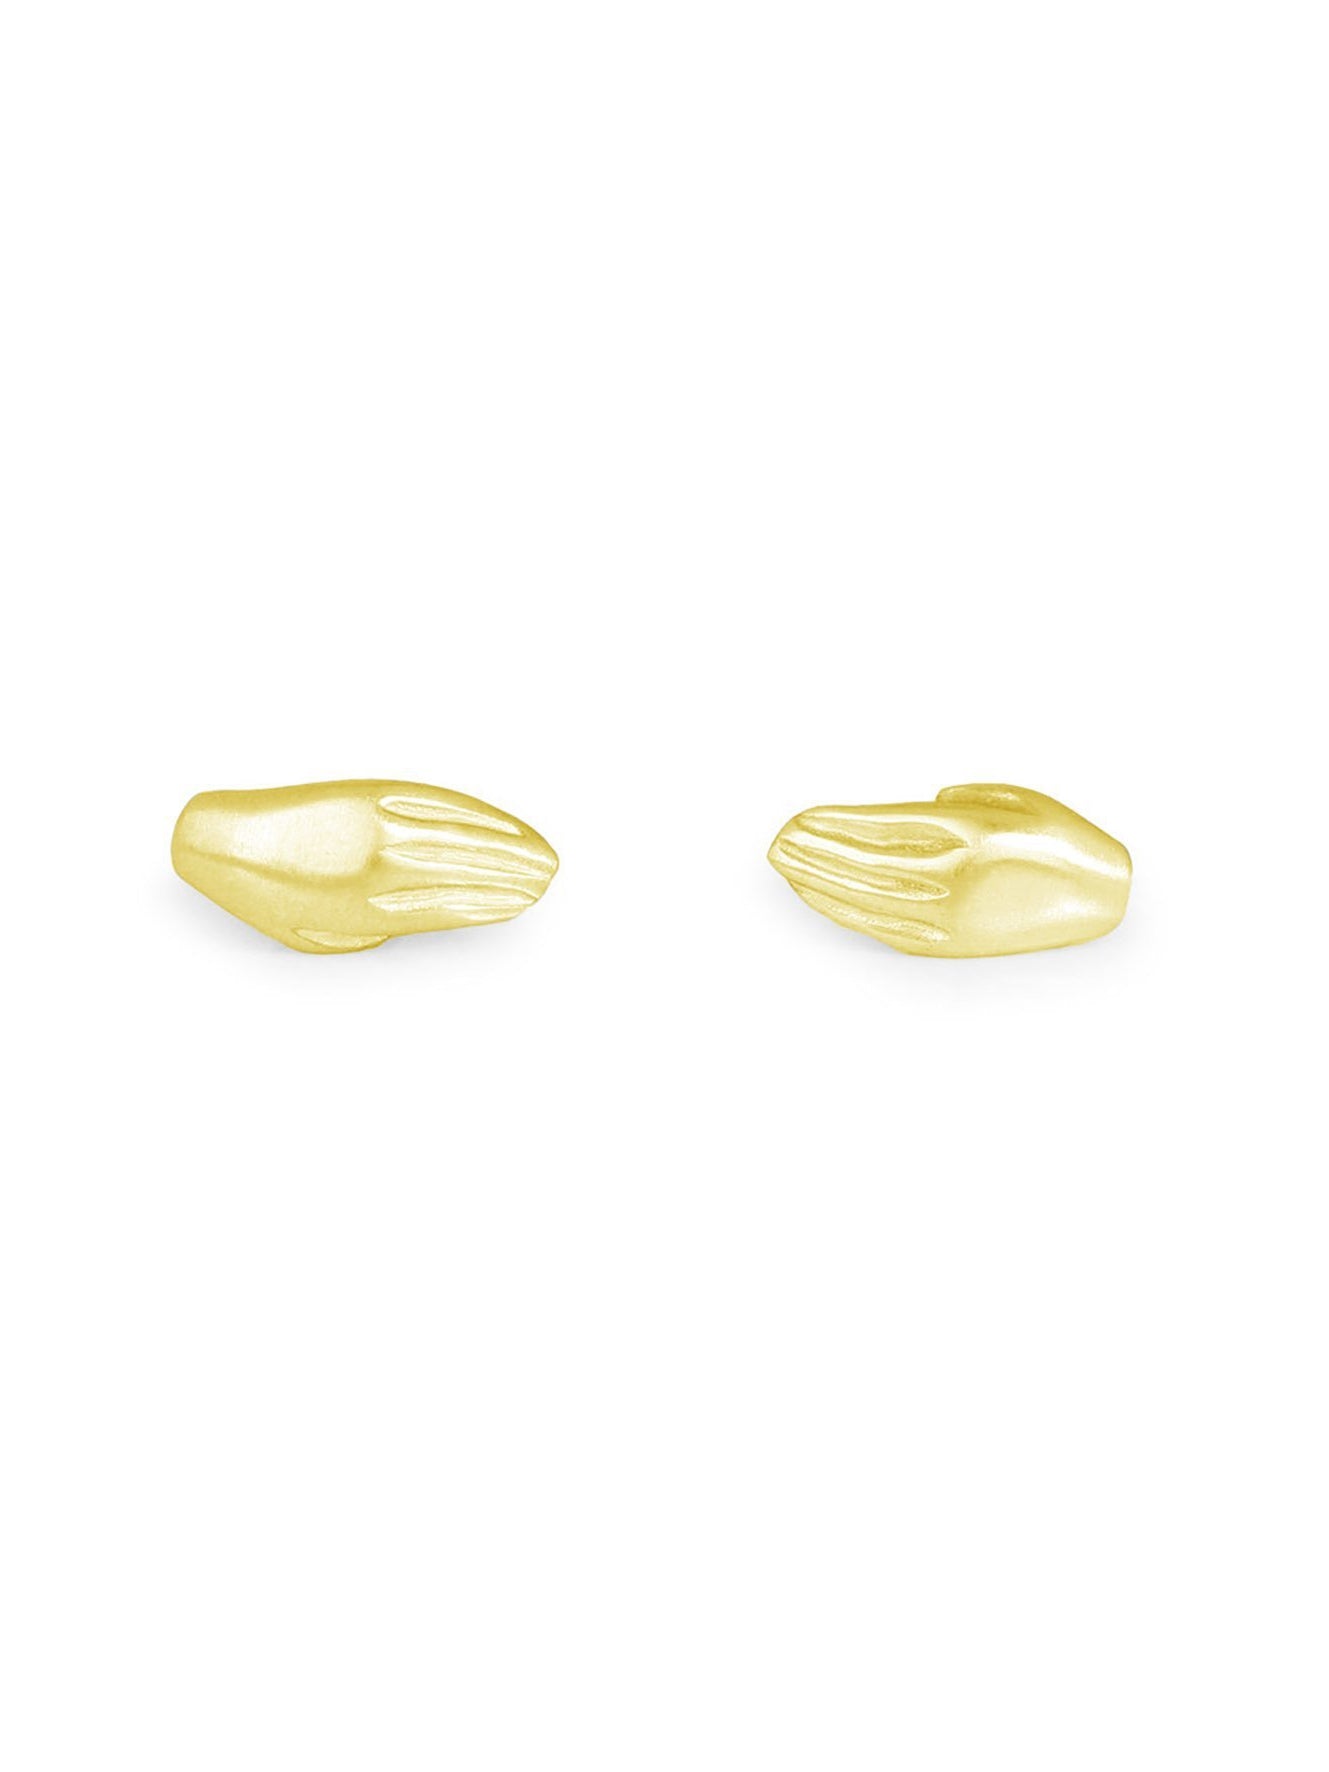 Mini Hands Studs/Earrings - 18kt Yellow Gold Plated Sterling Silver